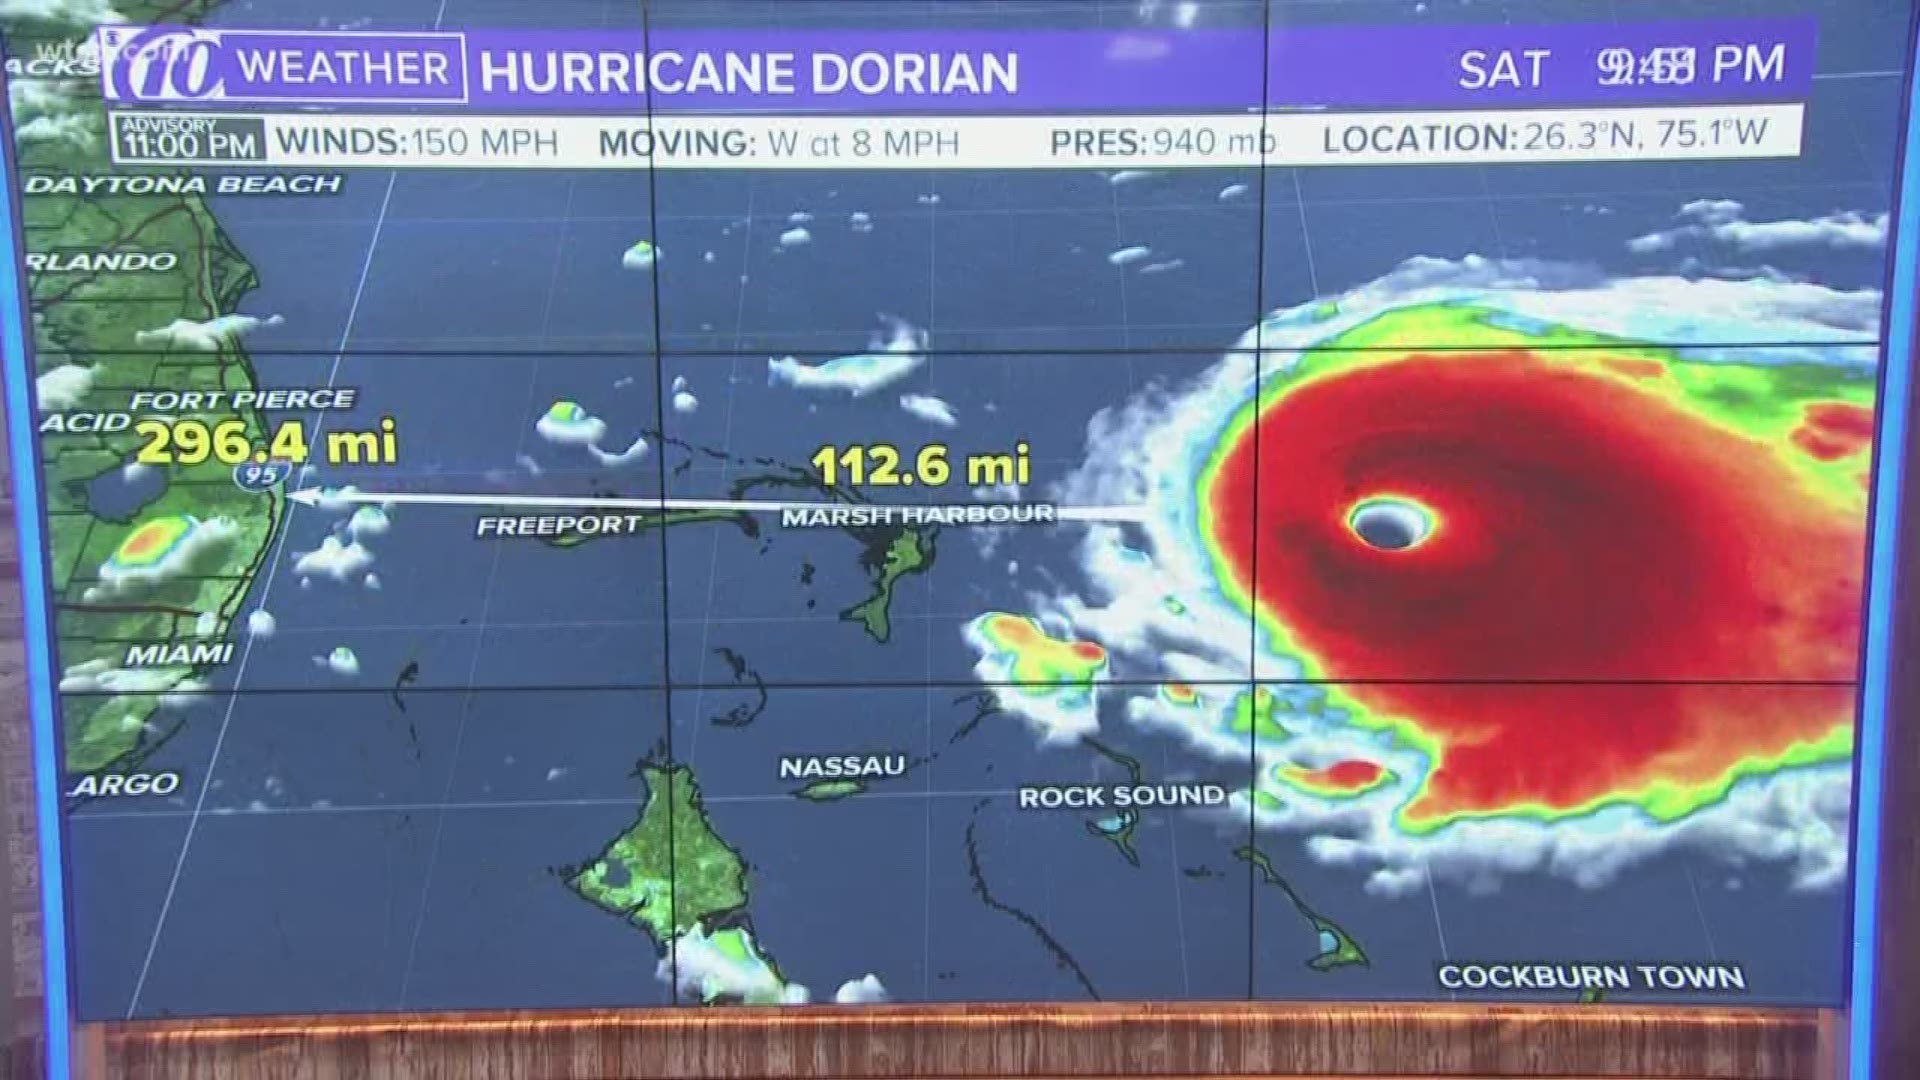 The 11 p.m. update from the National Hurricane Center keeps Dorian at a powerful Category 4 hurricane as it moves toward the Bahamas.

The National Hurricane Center has issued a tropical storm watch for parts of Florida's east coast ahead of Hurricane Dorian.